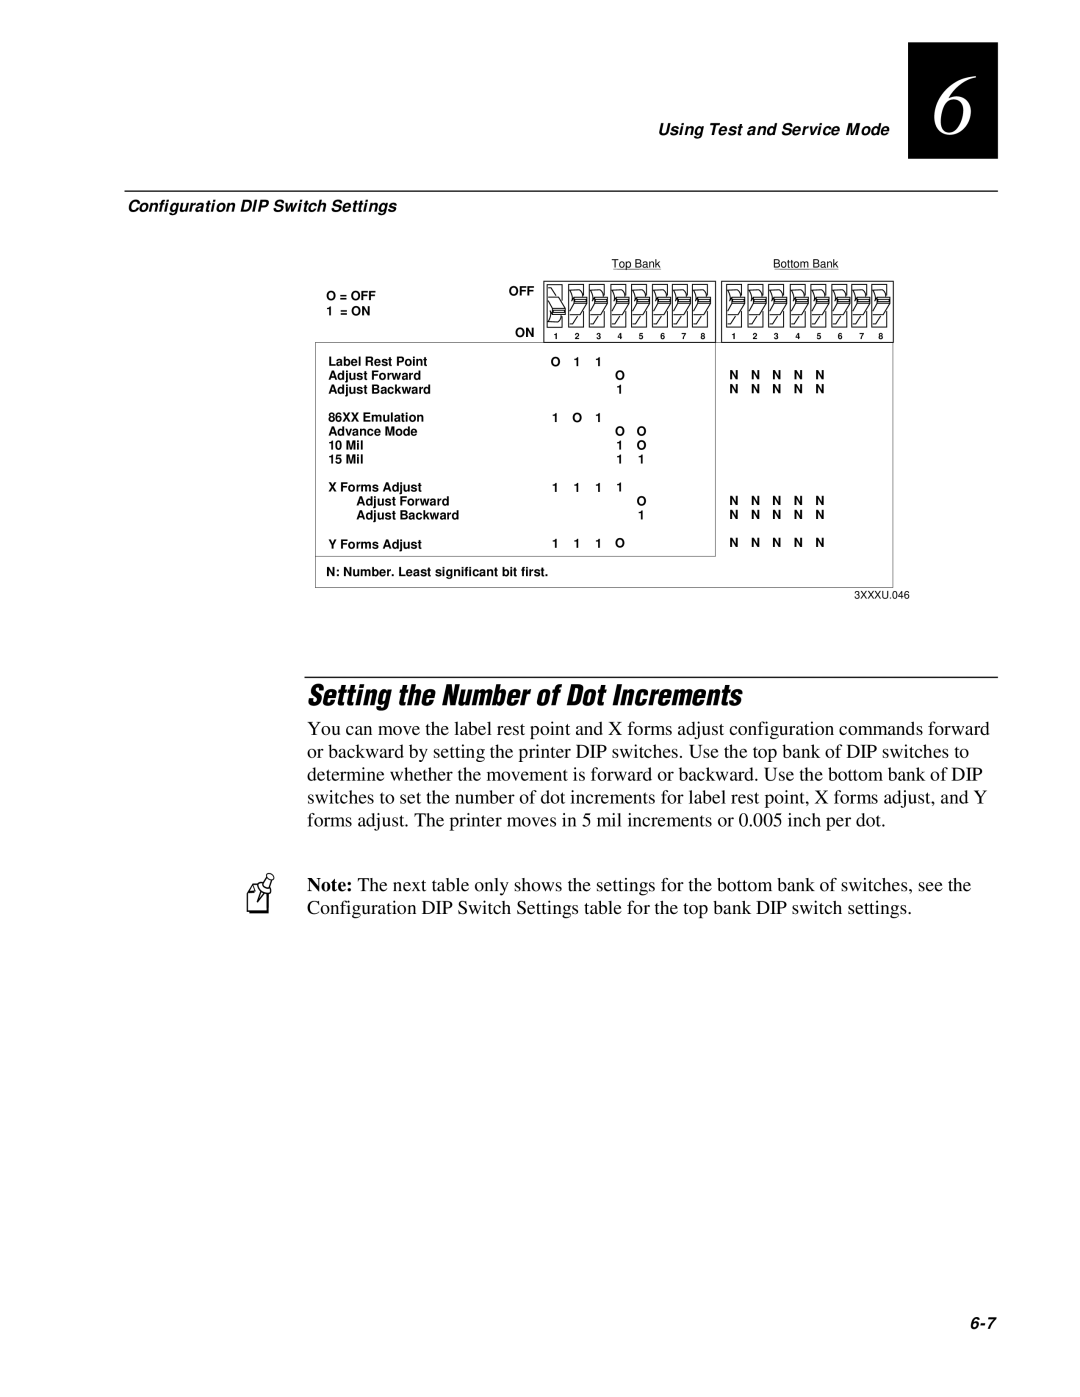 IBM EasyCoder 3400e user manual Setting the Number of Dot Increments, Configuration DIP Switch Settings 